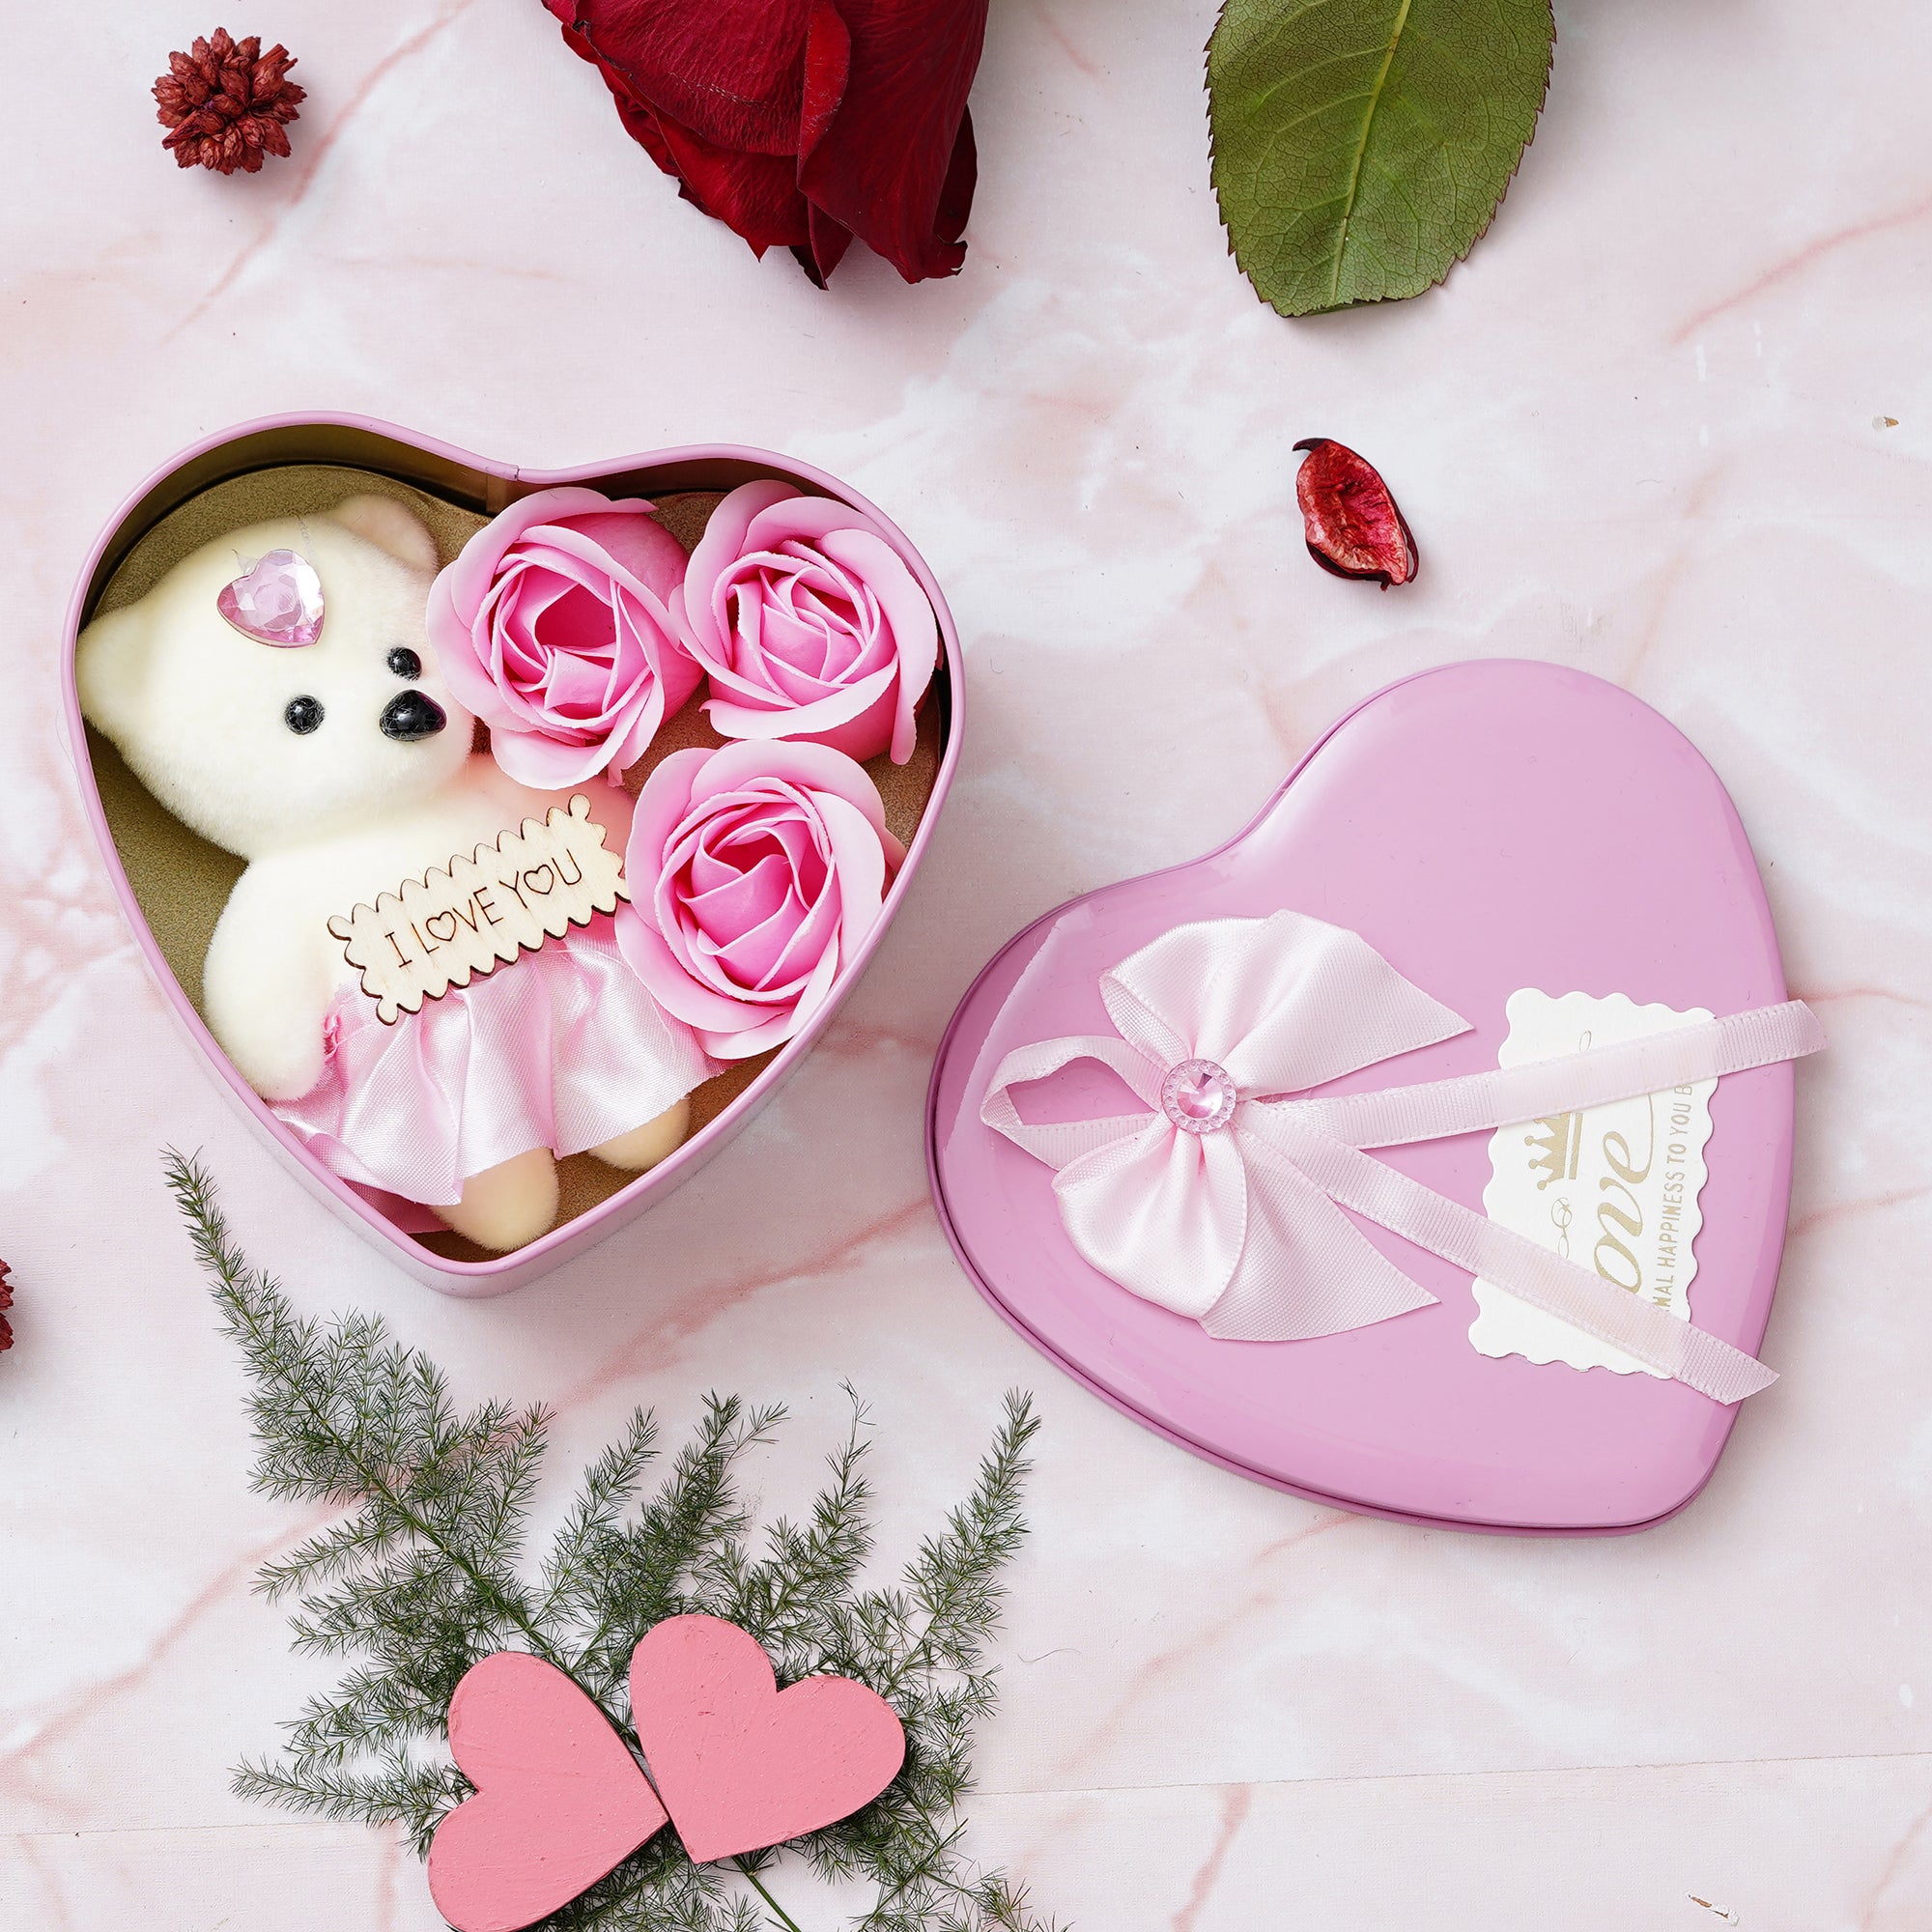 Valentine Combo of Card, "20 Reasons Why I Need You" Printed on Little Hearts Wooden Gift Set, Pink Heart Shaped Gift Box with Teddy and Roses 5